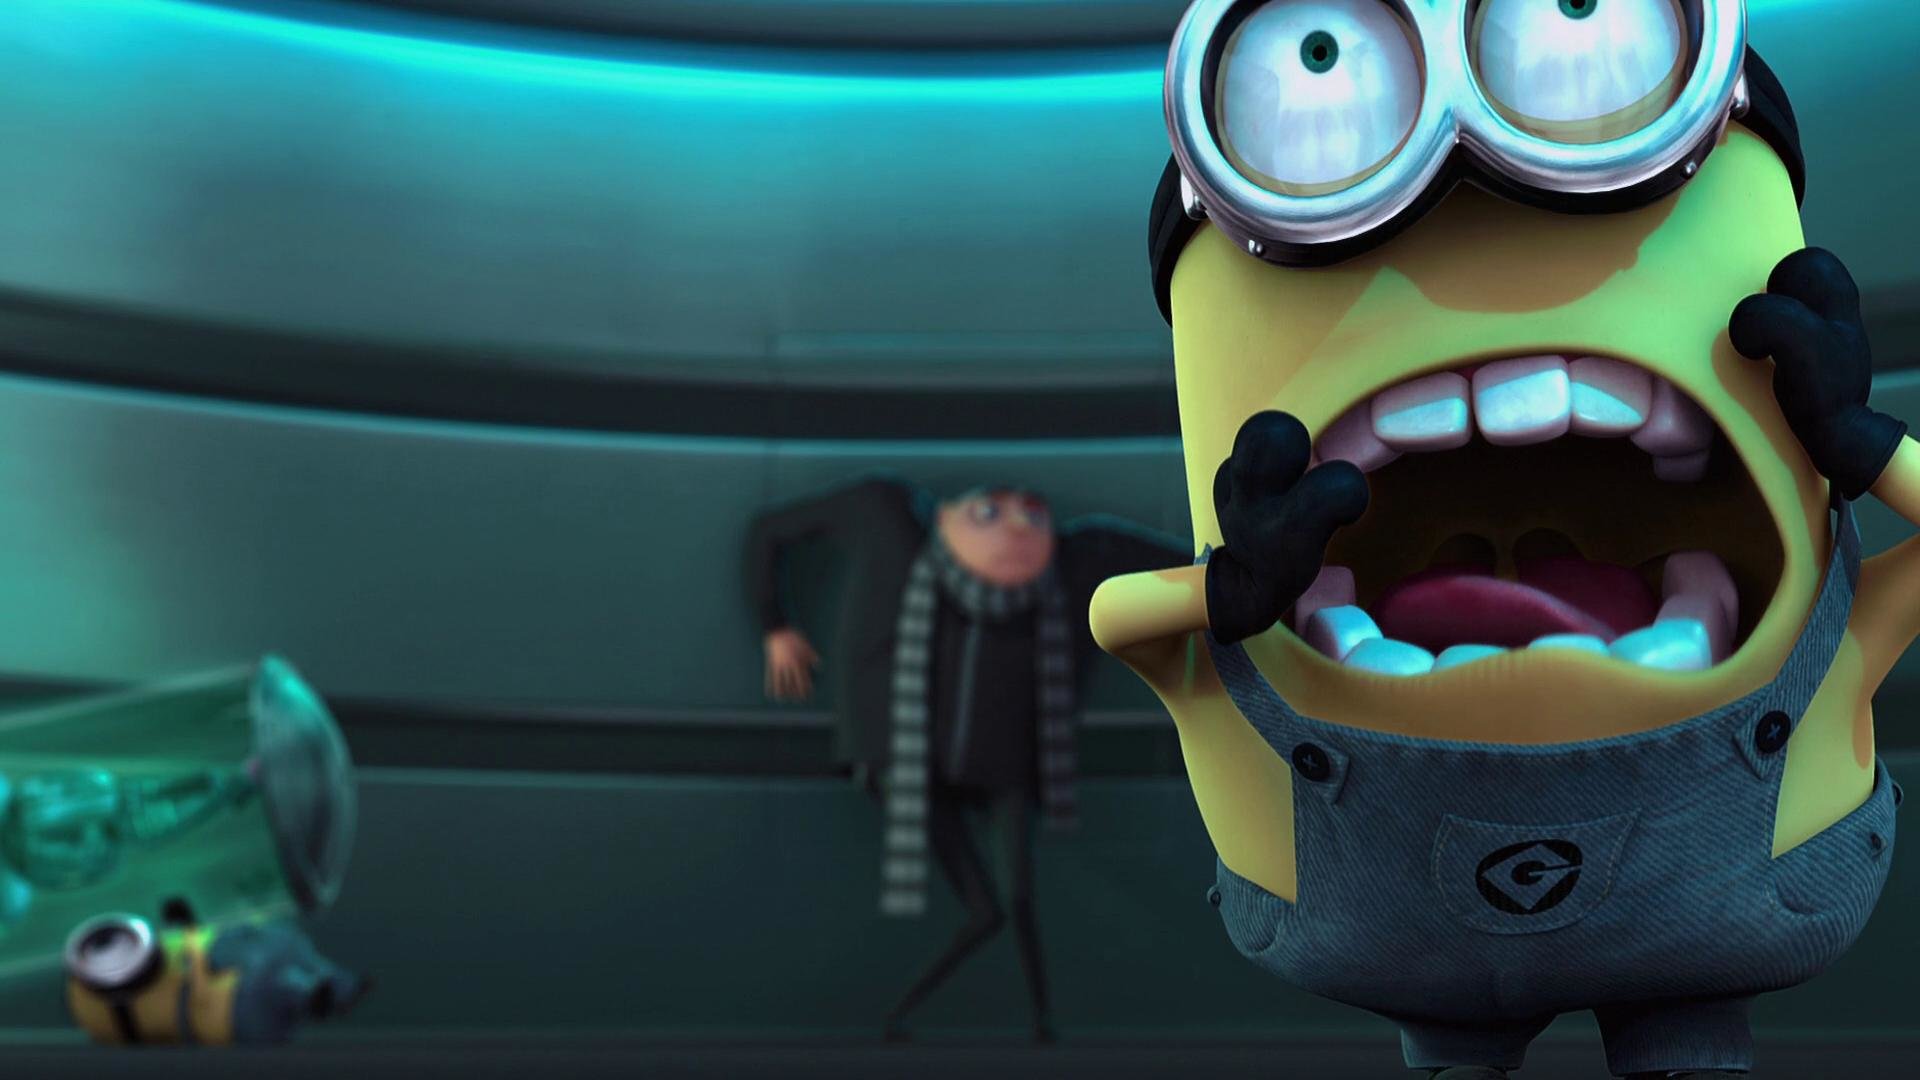 Download full hd Gru (Despicable Me) computer wallpaper ID:408052 for free